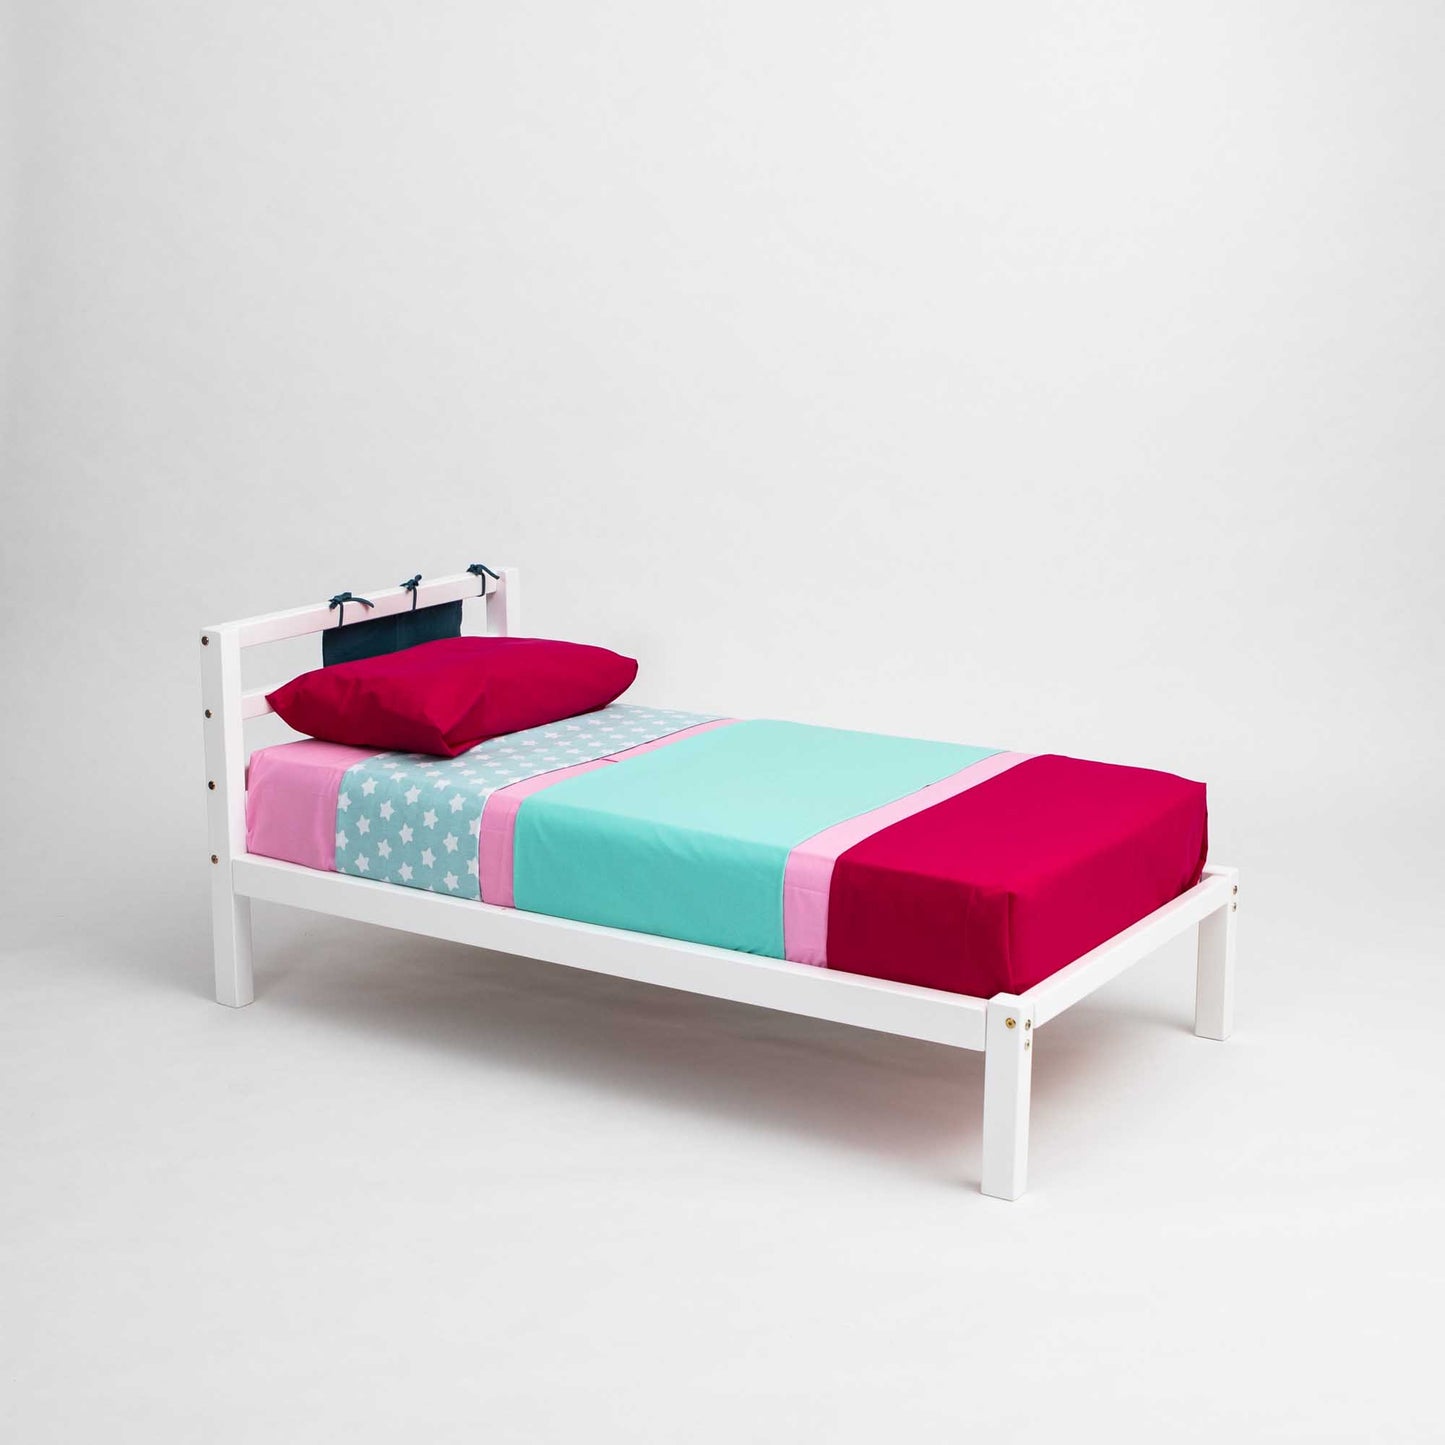 A Sweet Home From Wood 2-in-1 transformable kids' bed with a horizontal rail headboard, with a pink, blue, and green cover suitable for girls.